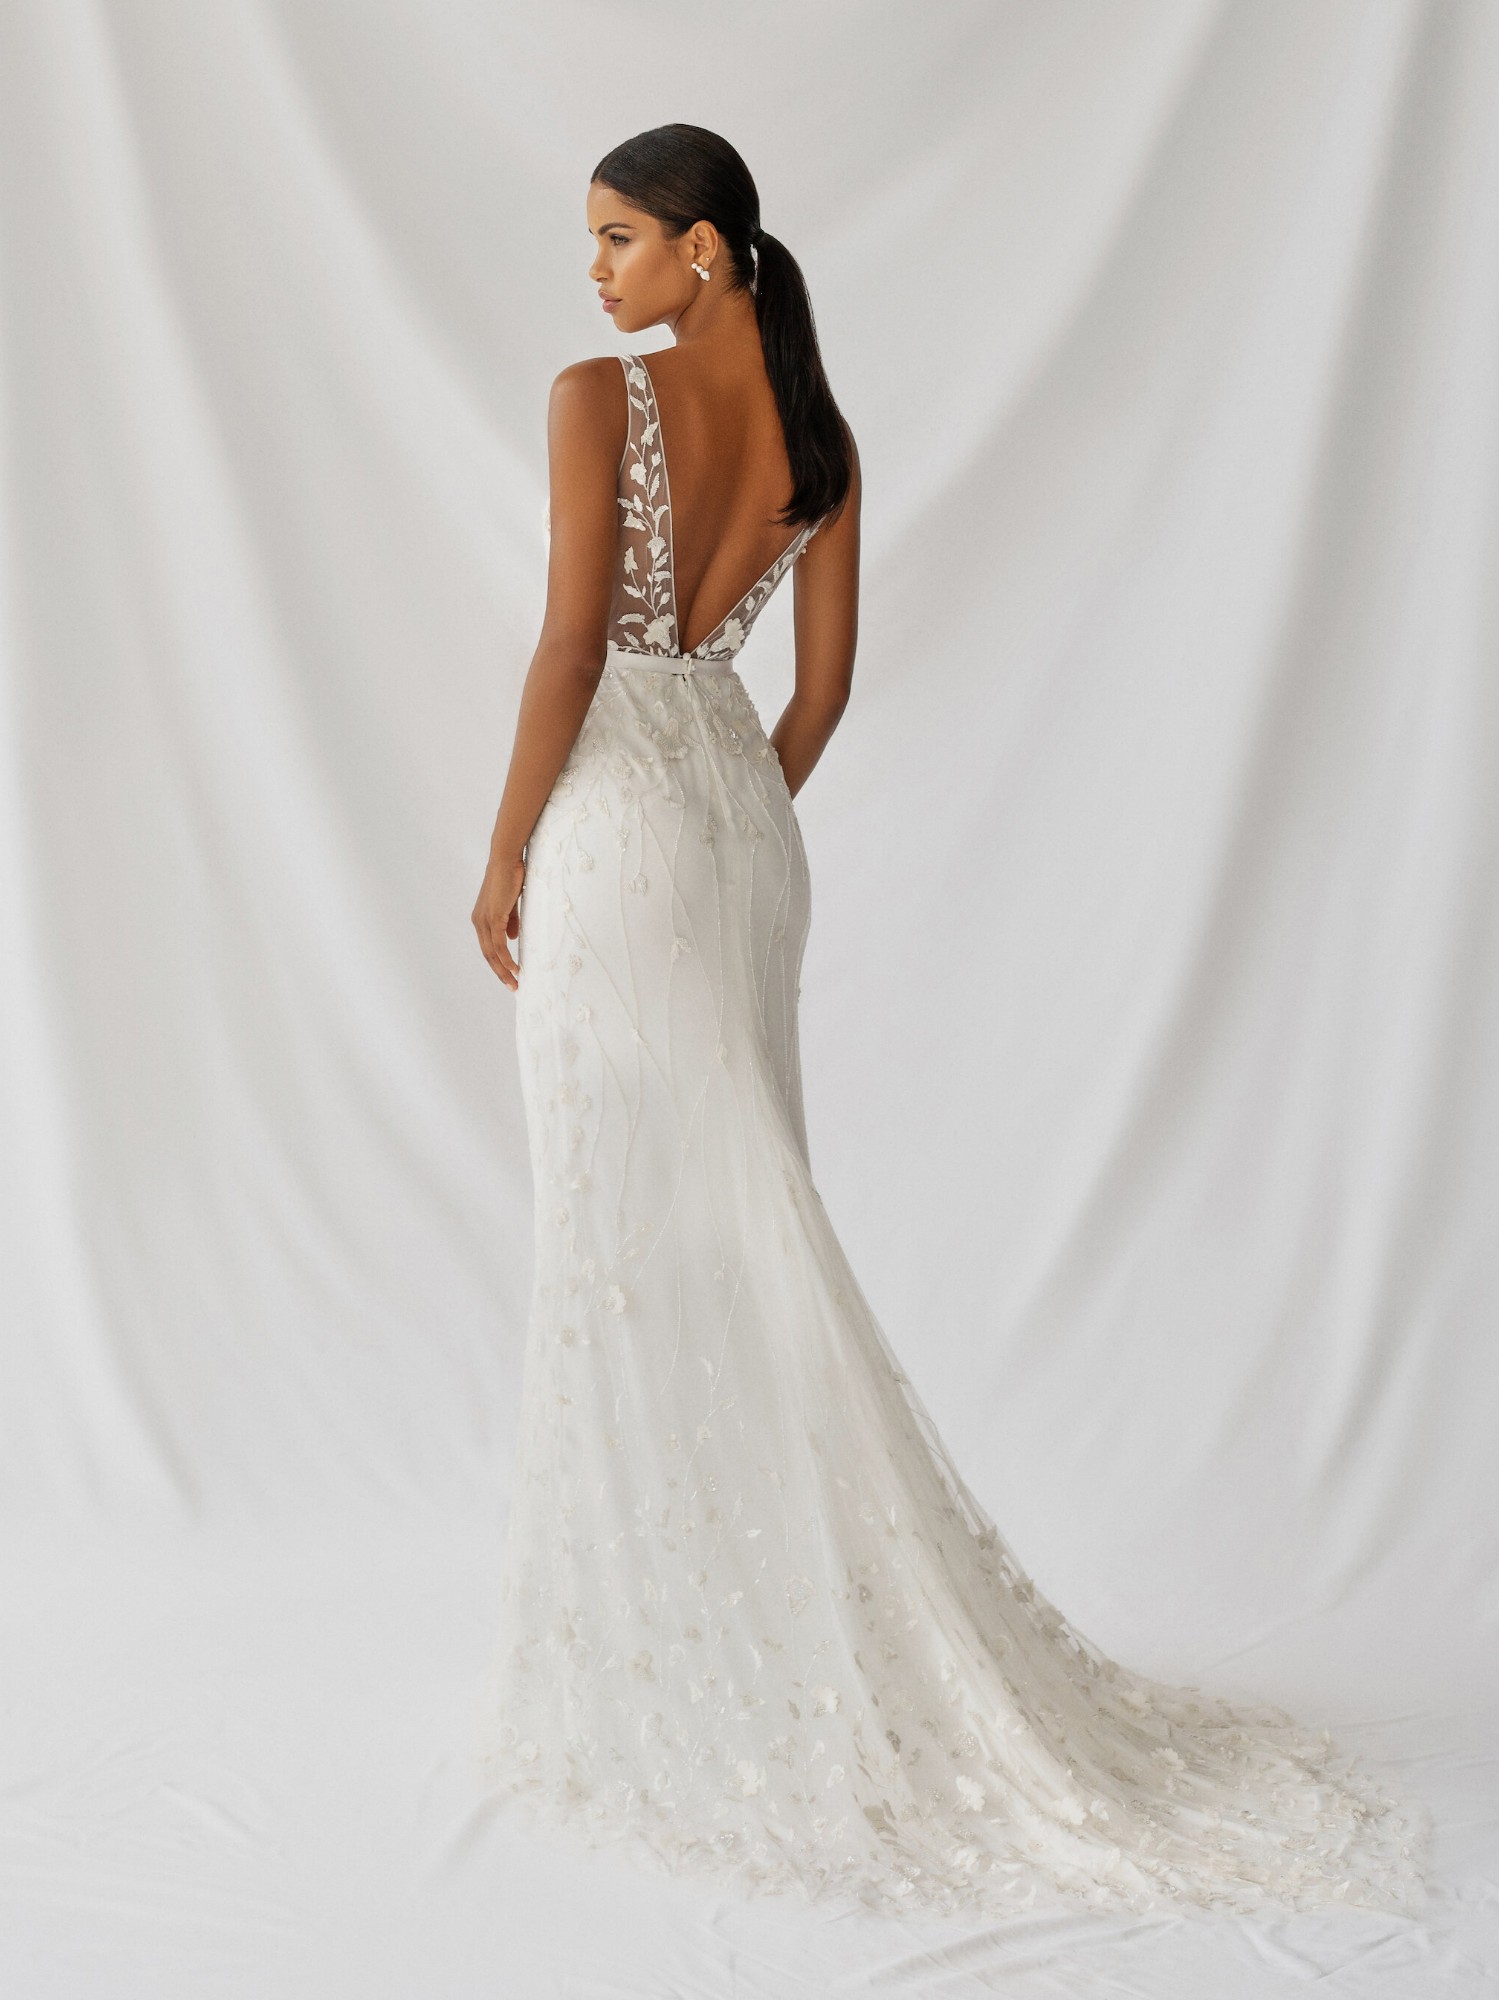 Zinnia Gown Inspirated By Botanica of Alexandra Grecco 2021 Bridal Collection